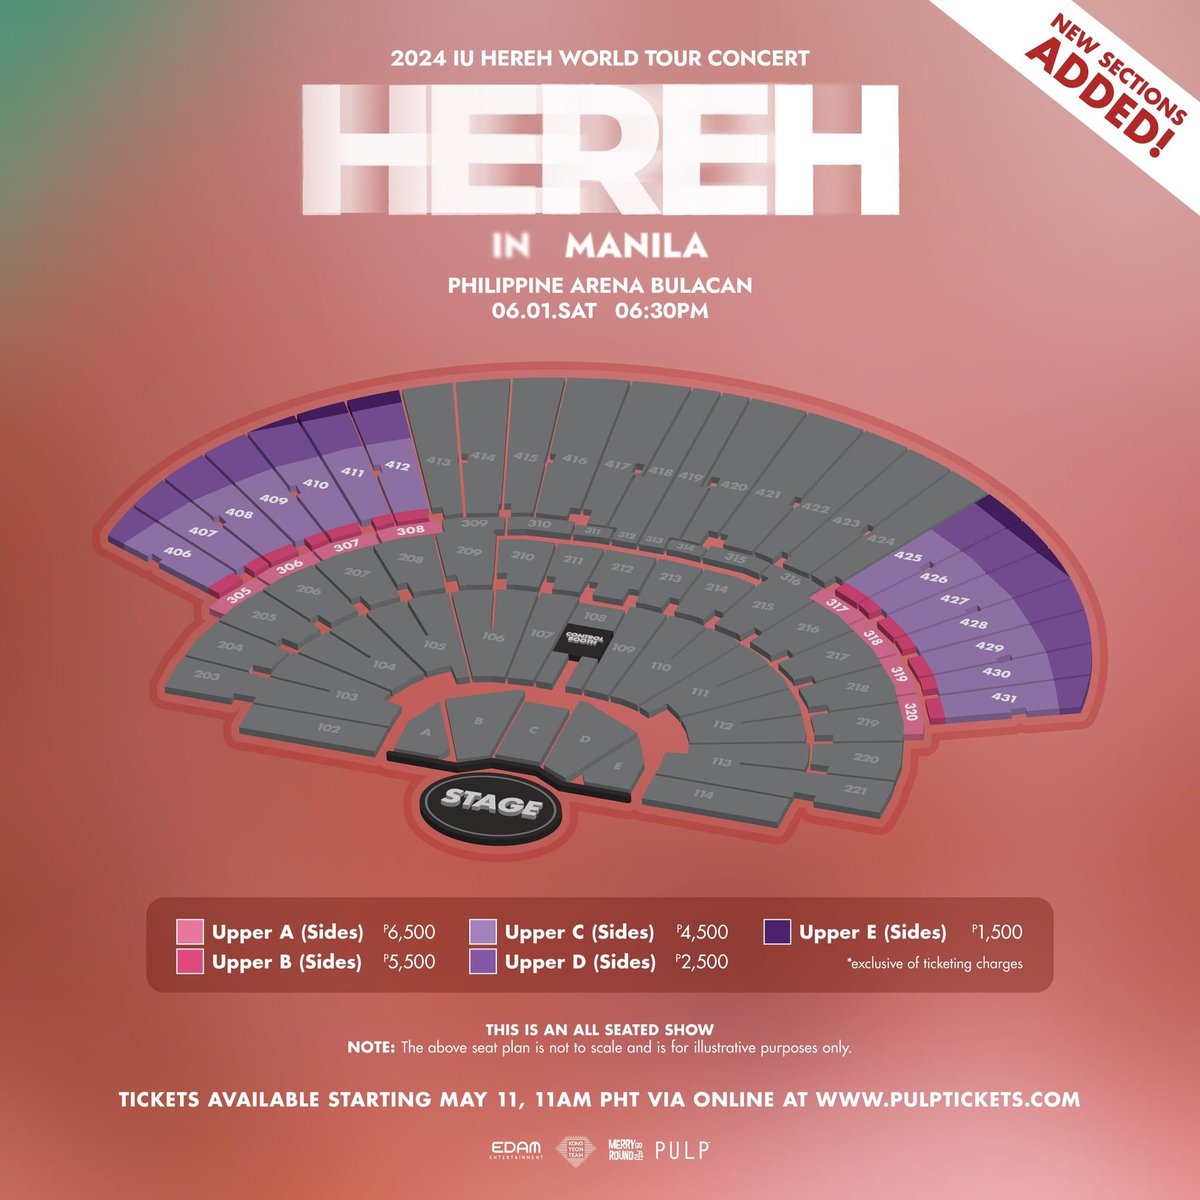 NEW SECTIONS ADDED!💖 Catch South Korean sensation IU during her '2024 IU H.E.R. World Tour Concert' at the Philippine Arena in Bulacan on June 1, 2024.

pep.ph
📷 dlwlrma, @pulpliveworld
#HER_WORLD_TOUR_IN_MANILA
#IUinMANILA